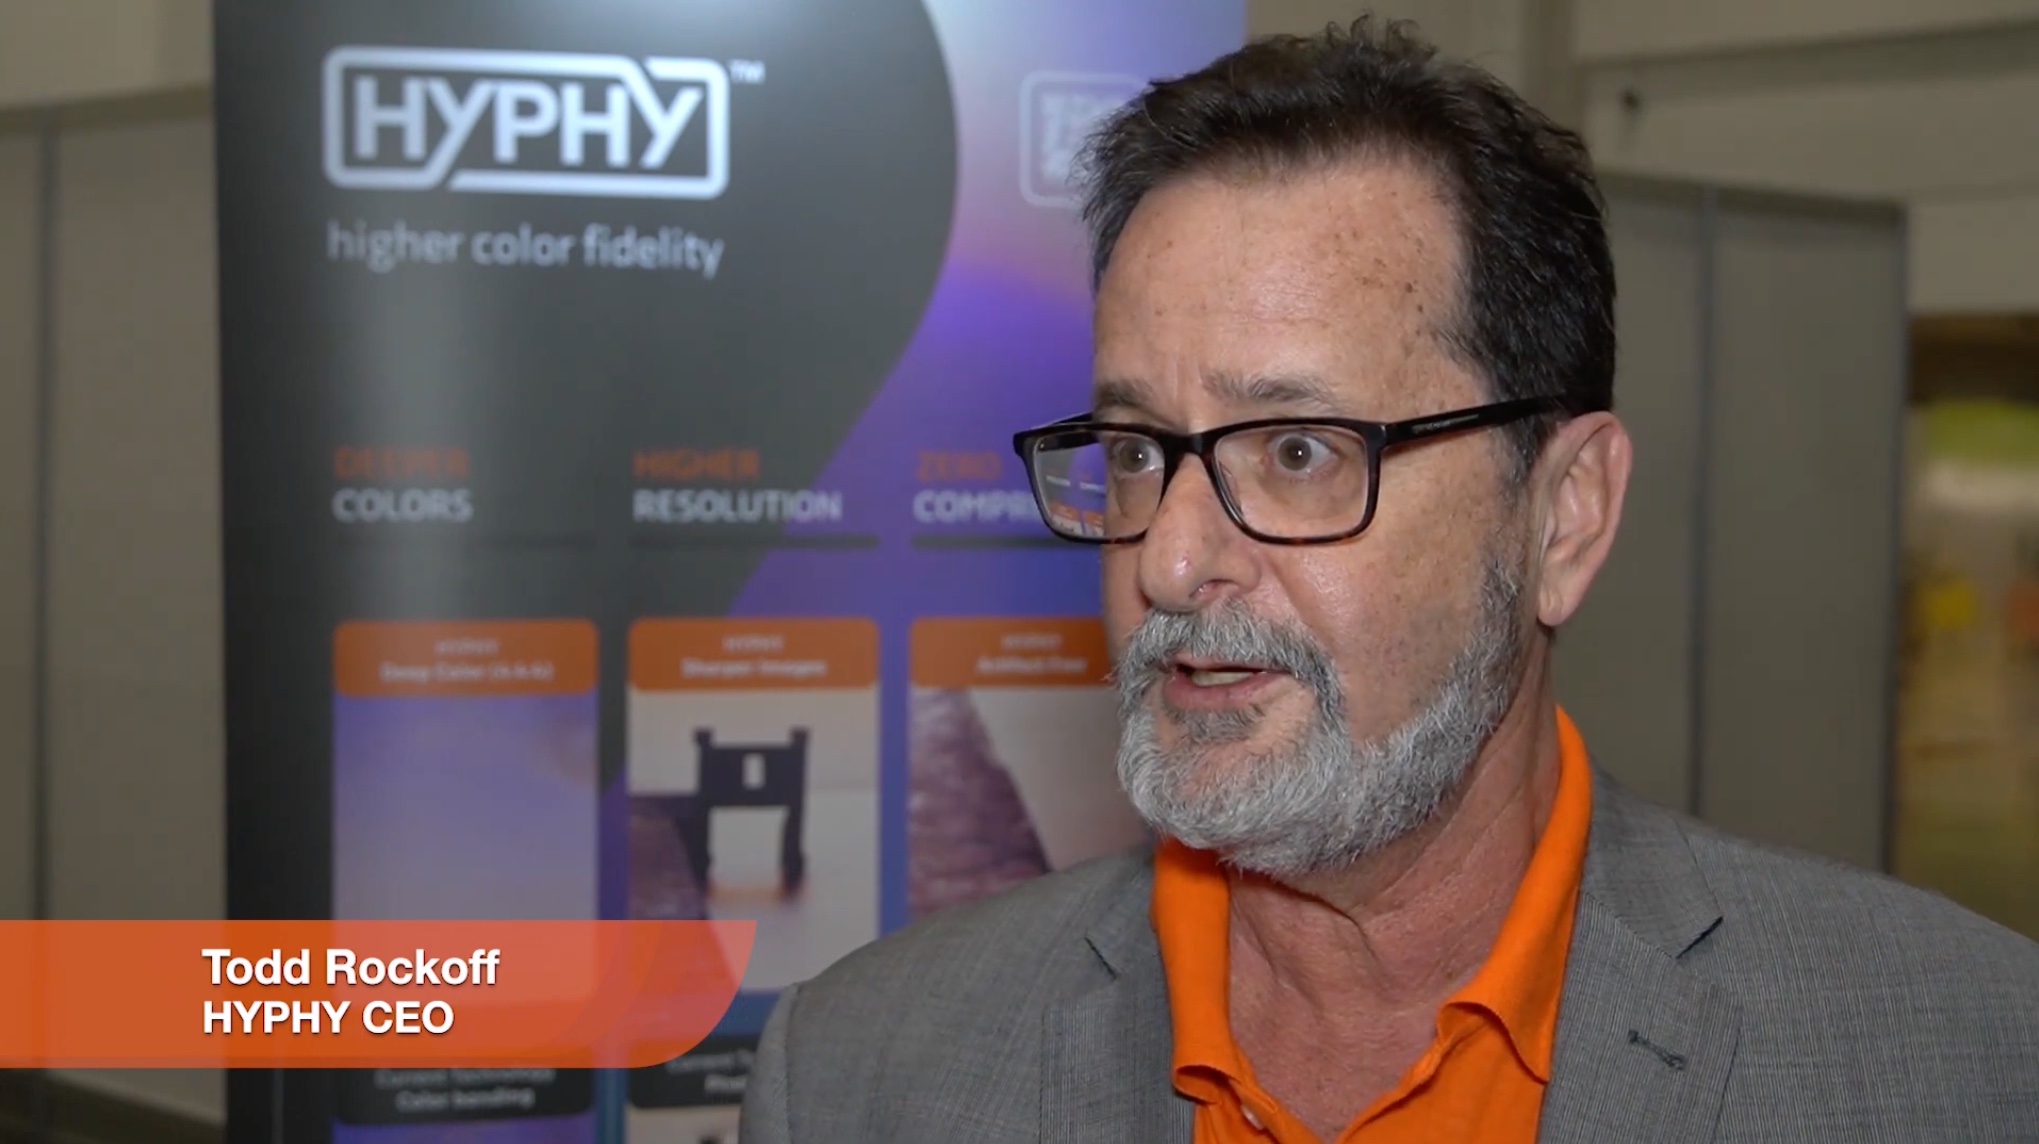 HYPHY CEO, Todd Rockoff Discusses HYPHY’s Market Entry Position